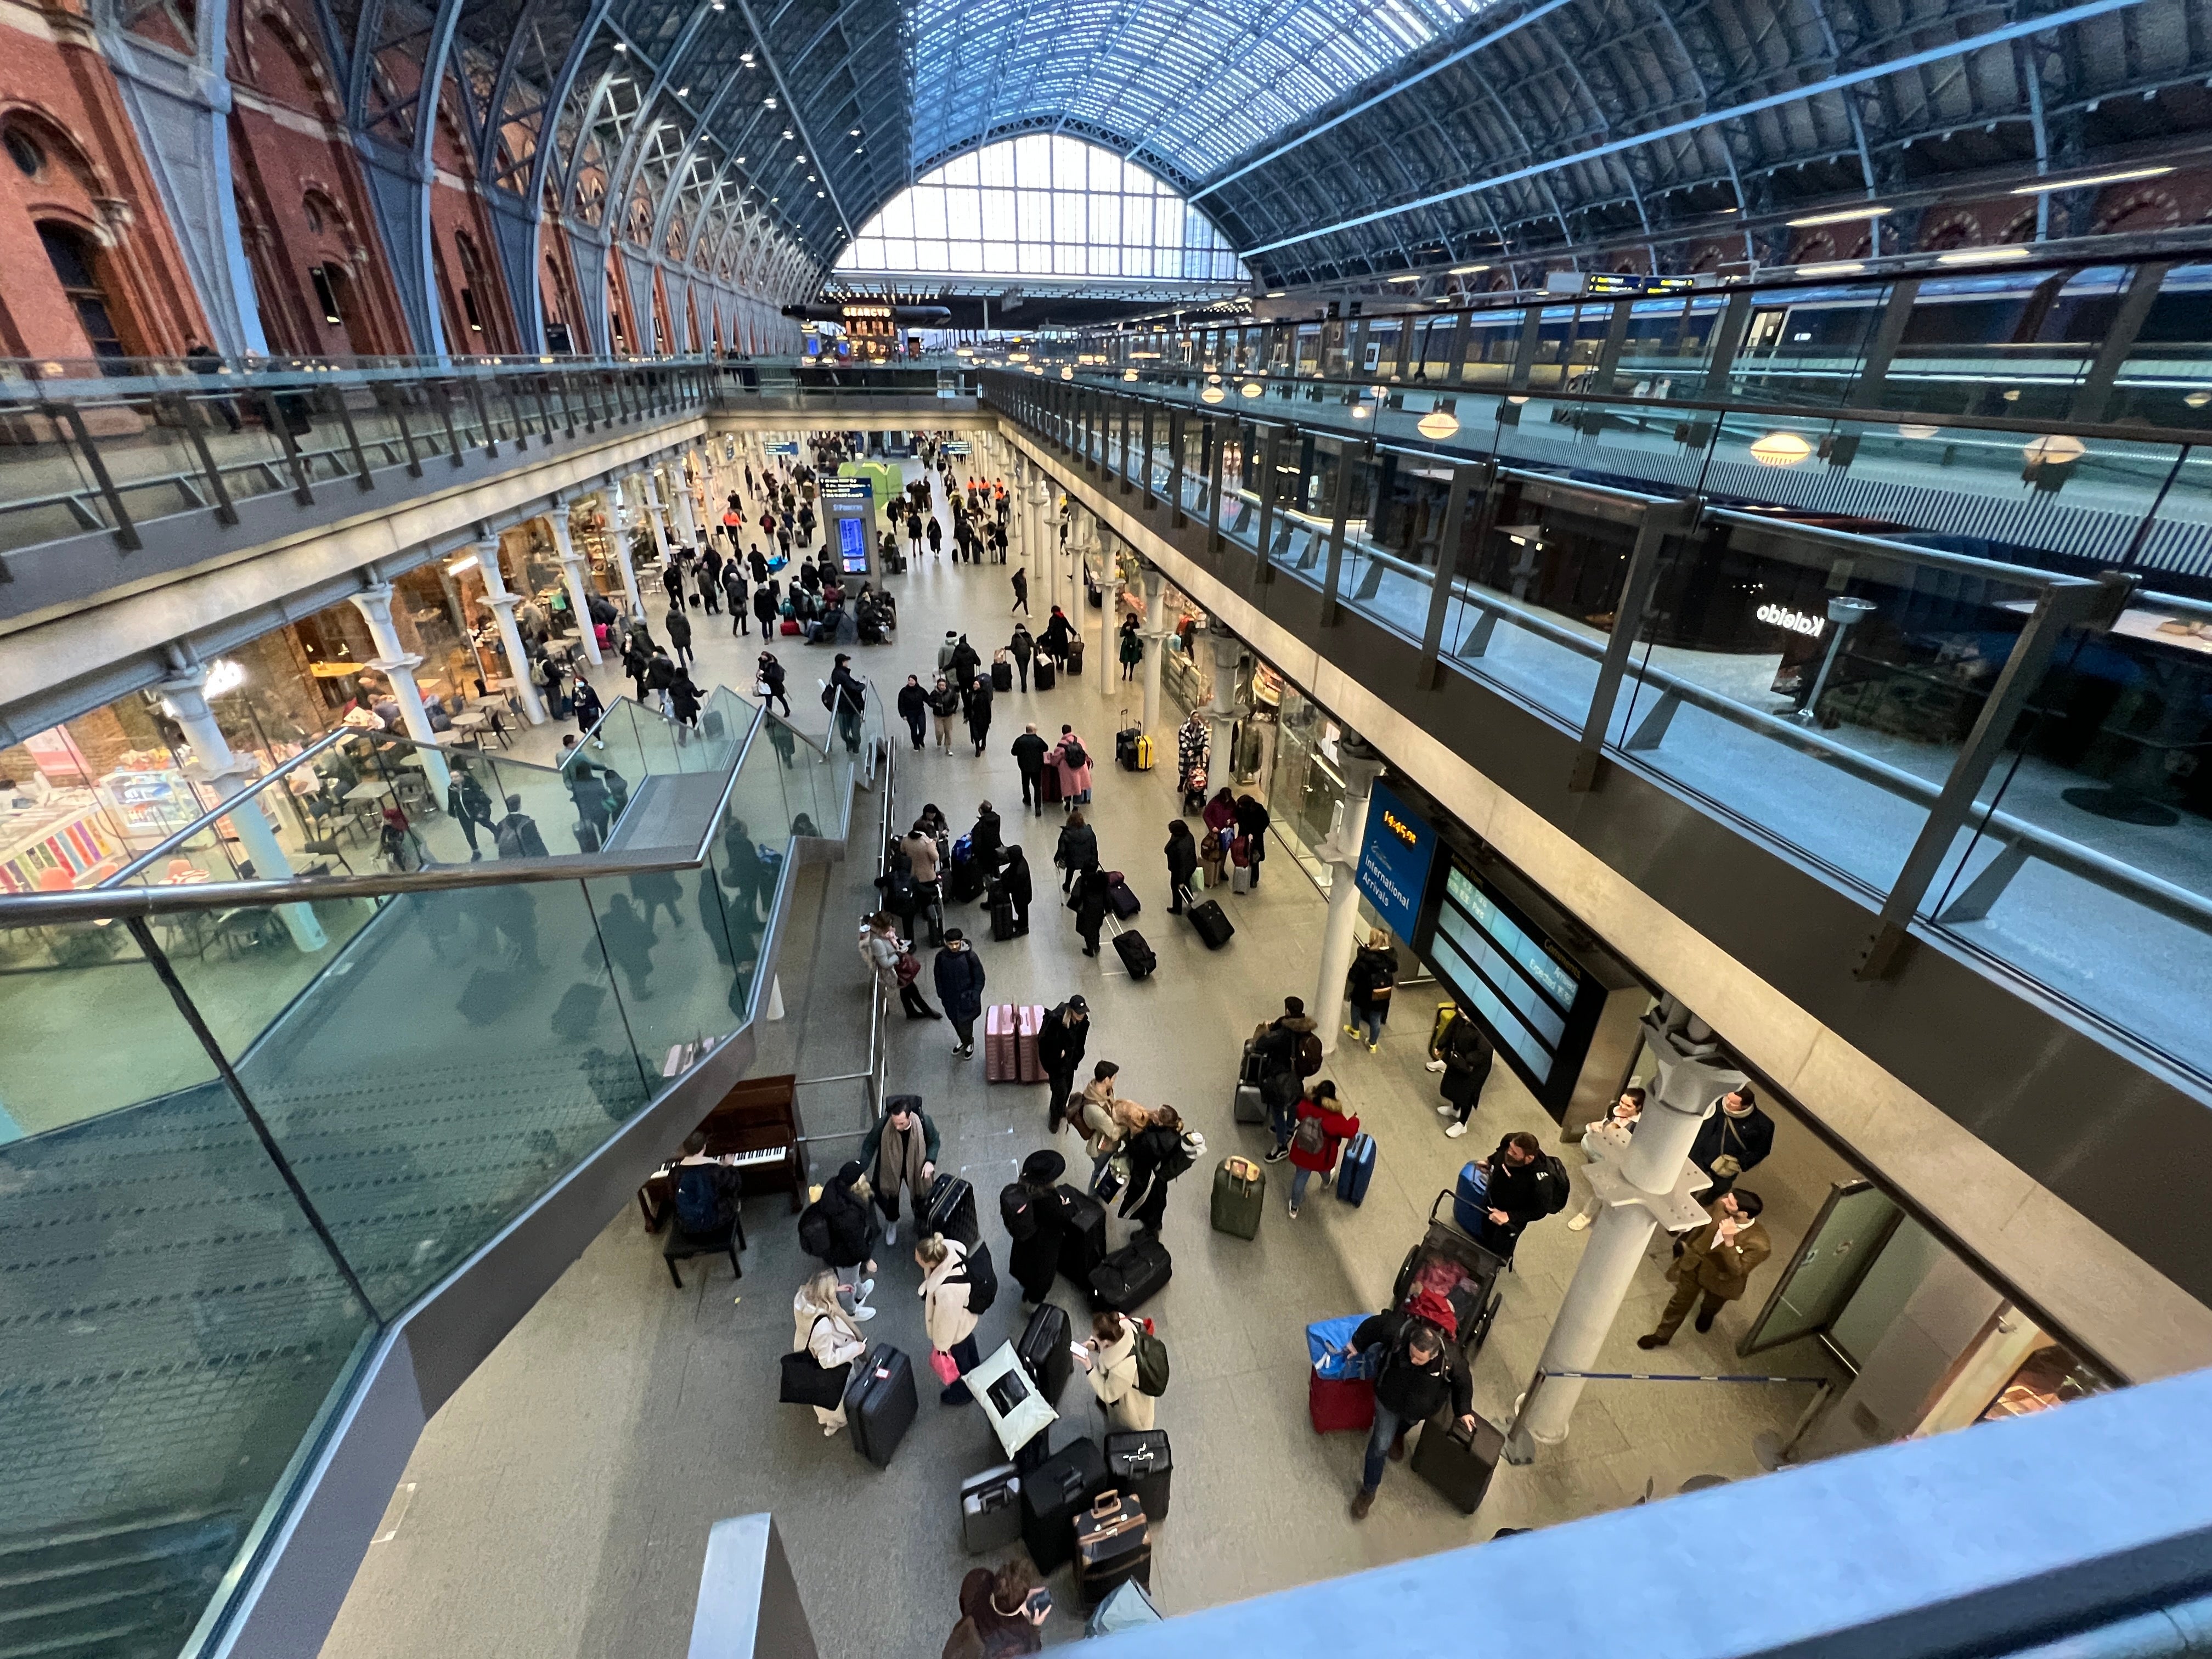 Action station: London St Pancras International, starting point for many Interrail adventures